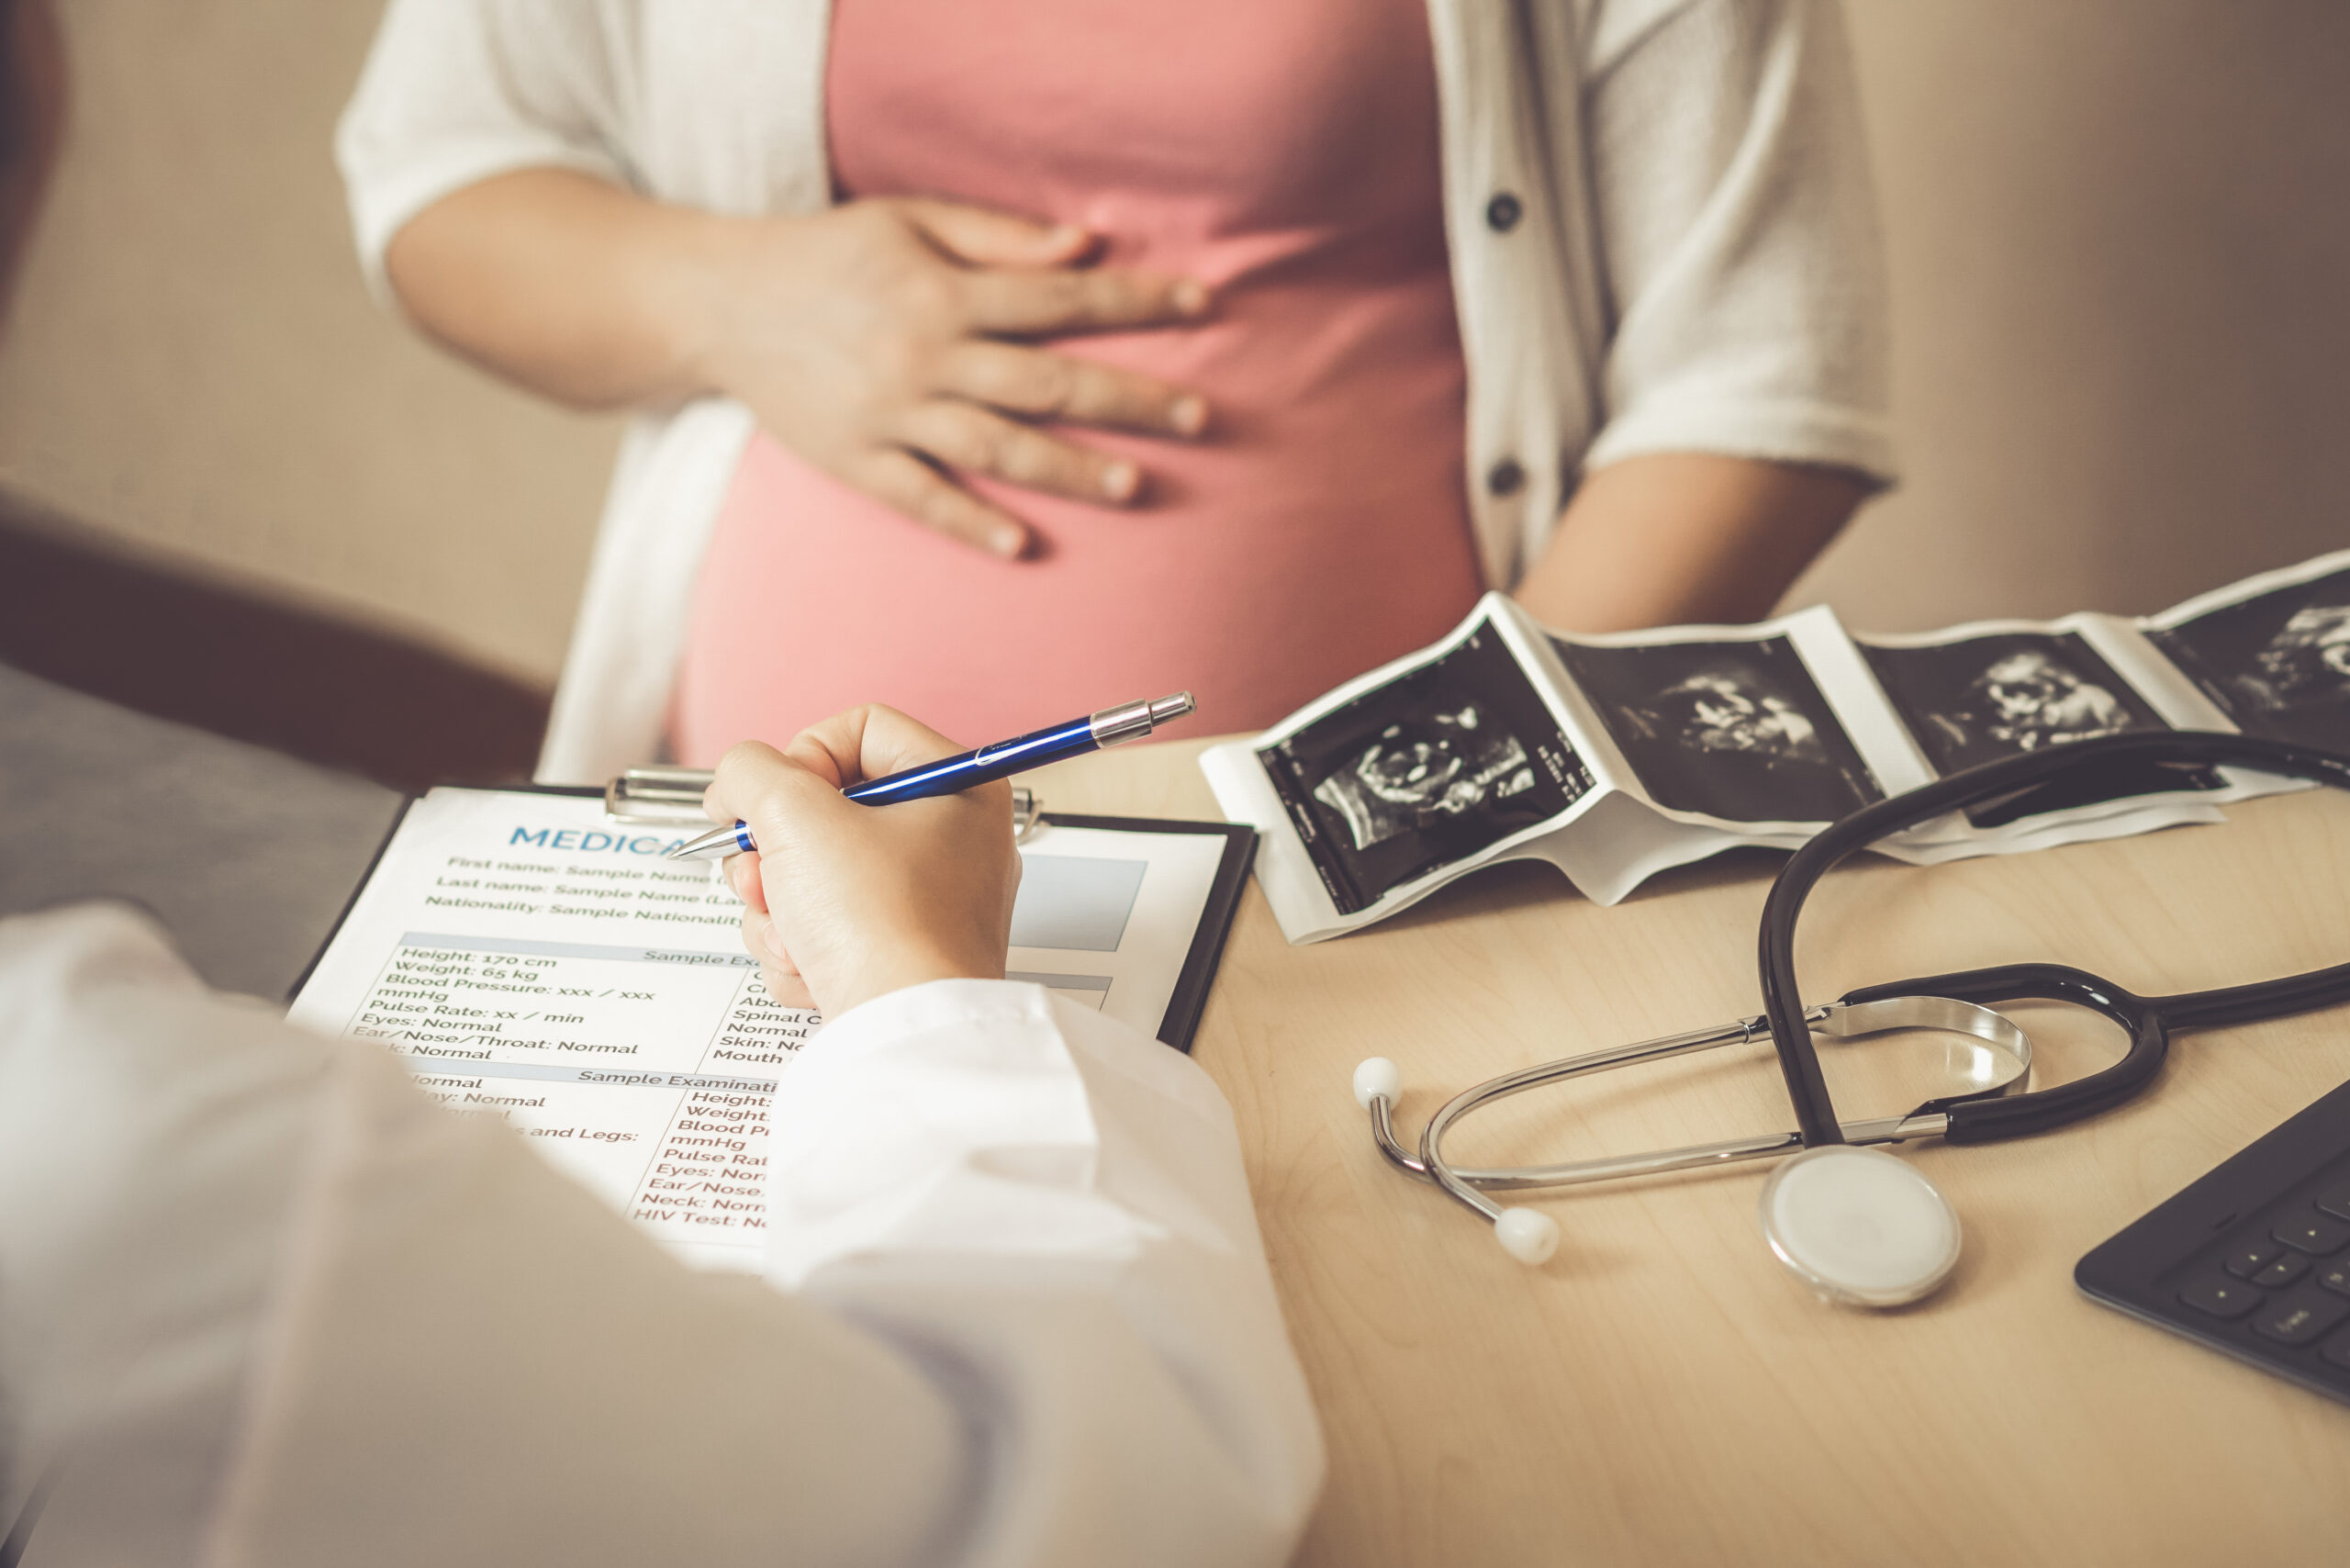 A close-up shot of a pregnant woman sitting across a from a doctor who is holding a clipboard with the woman's medical information.